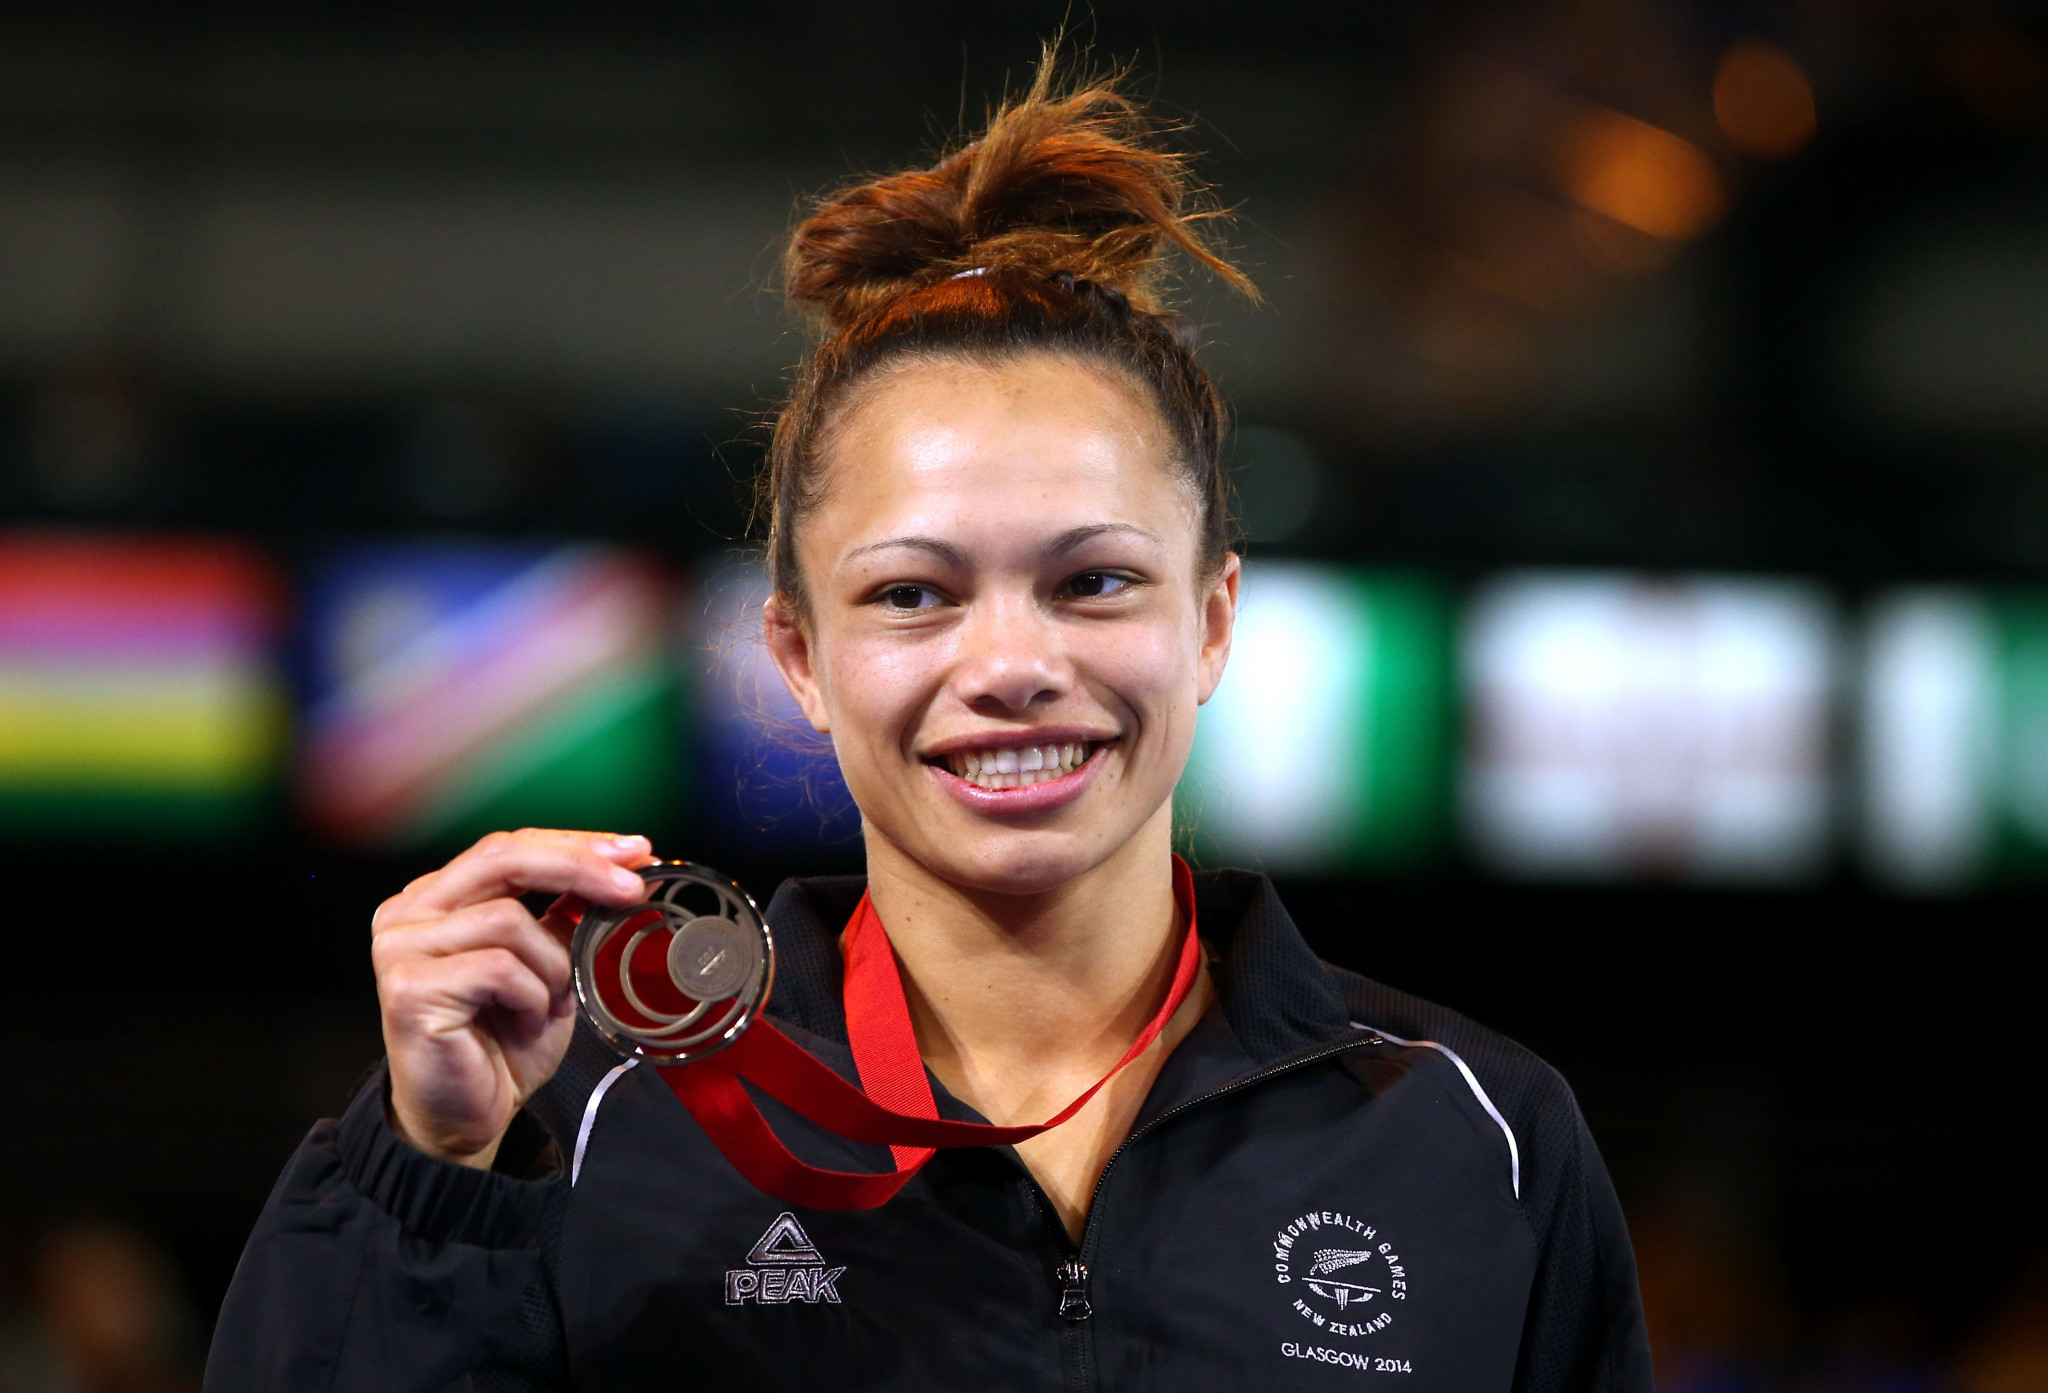 Tayla Ford claimed bronze at the Glasgow 2014 Commonwealth Games ©NZOC